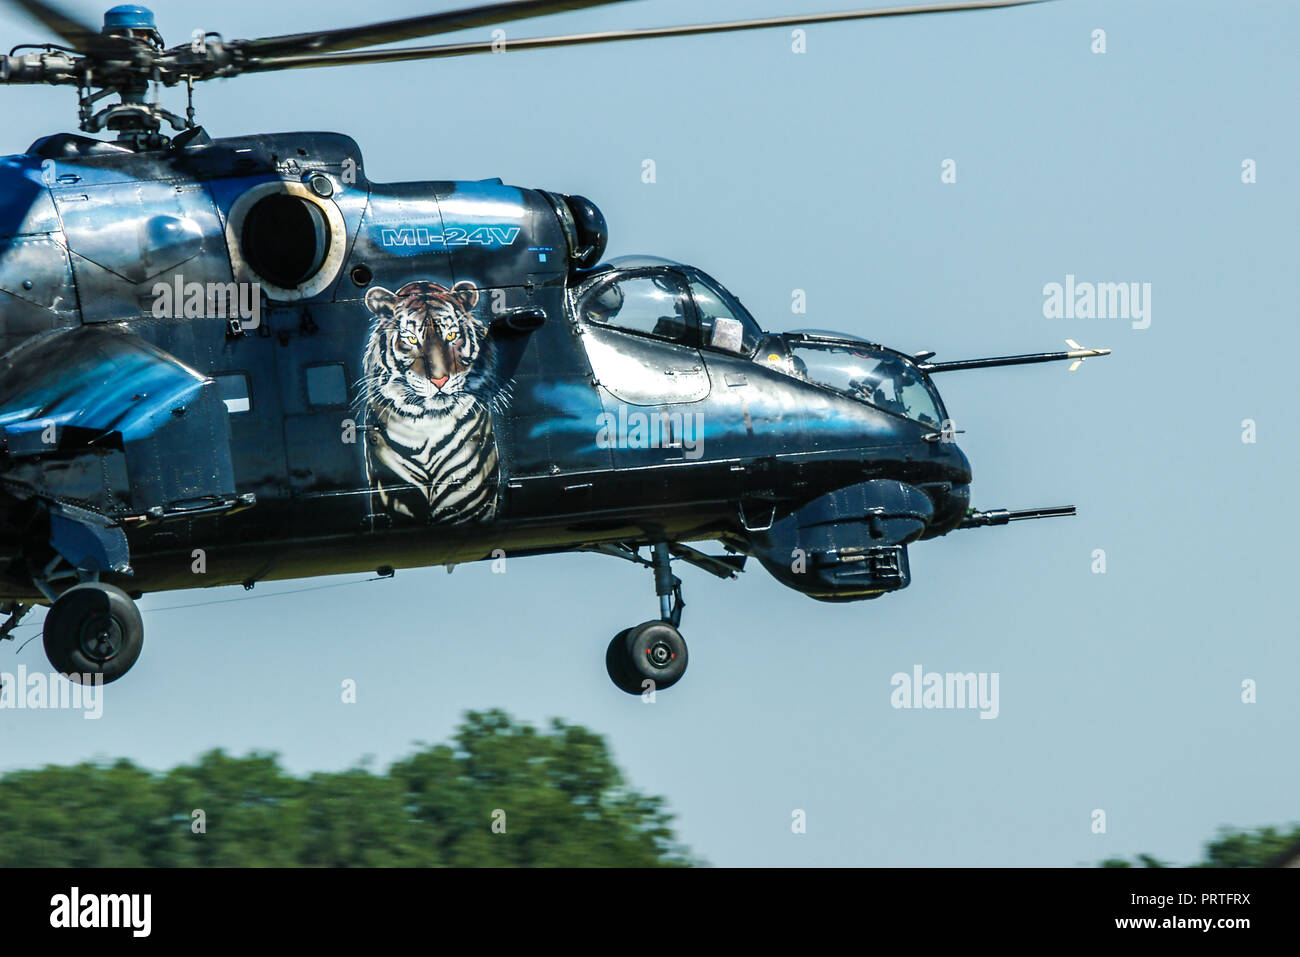 Czech AF Mil Mi-24 (NATO reporting name: Hind), large helicopter gunship, attack helicopter and troop transport. Russian Soviet era, at RIAT airshow Stock Photo